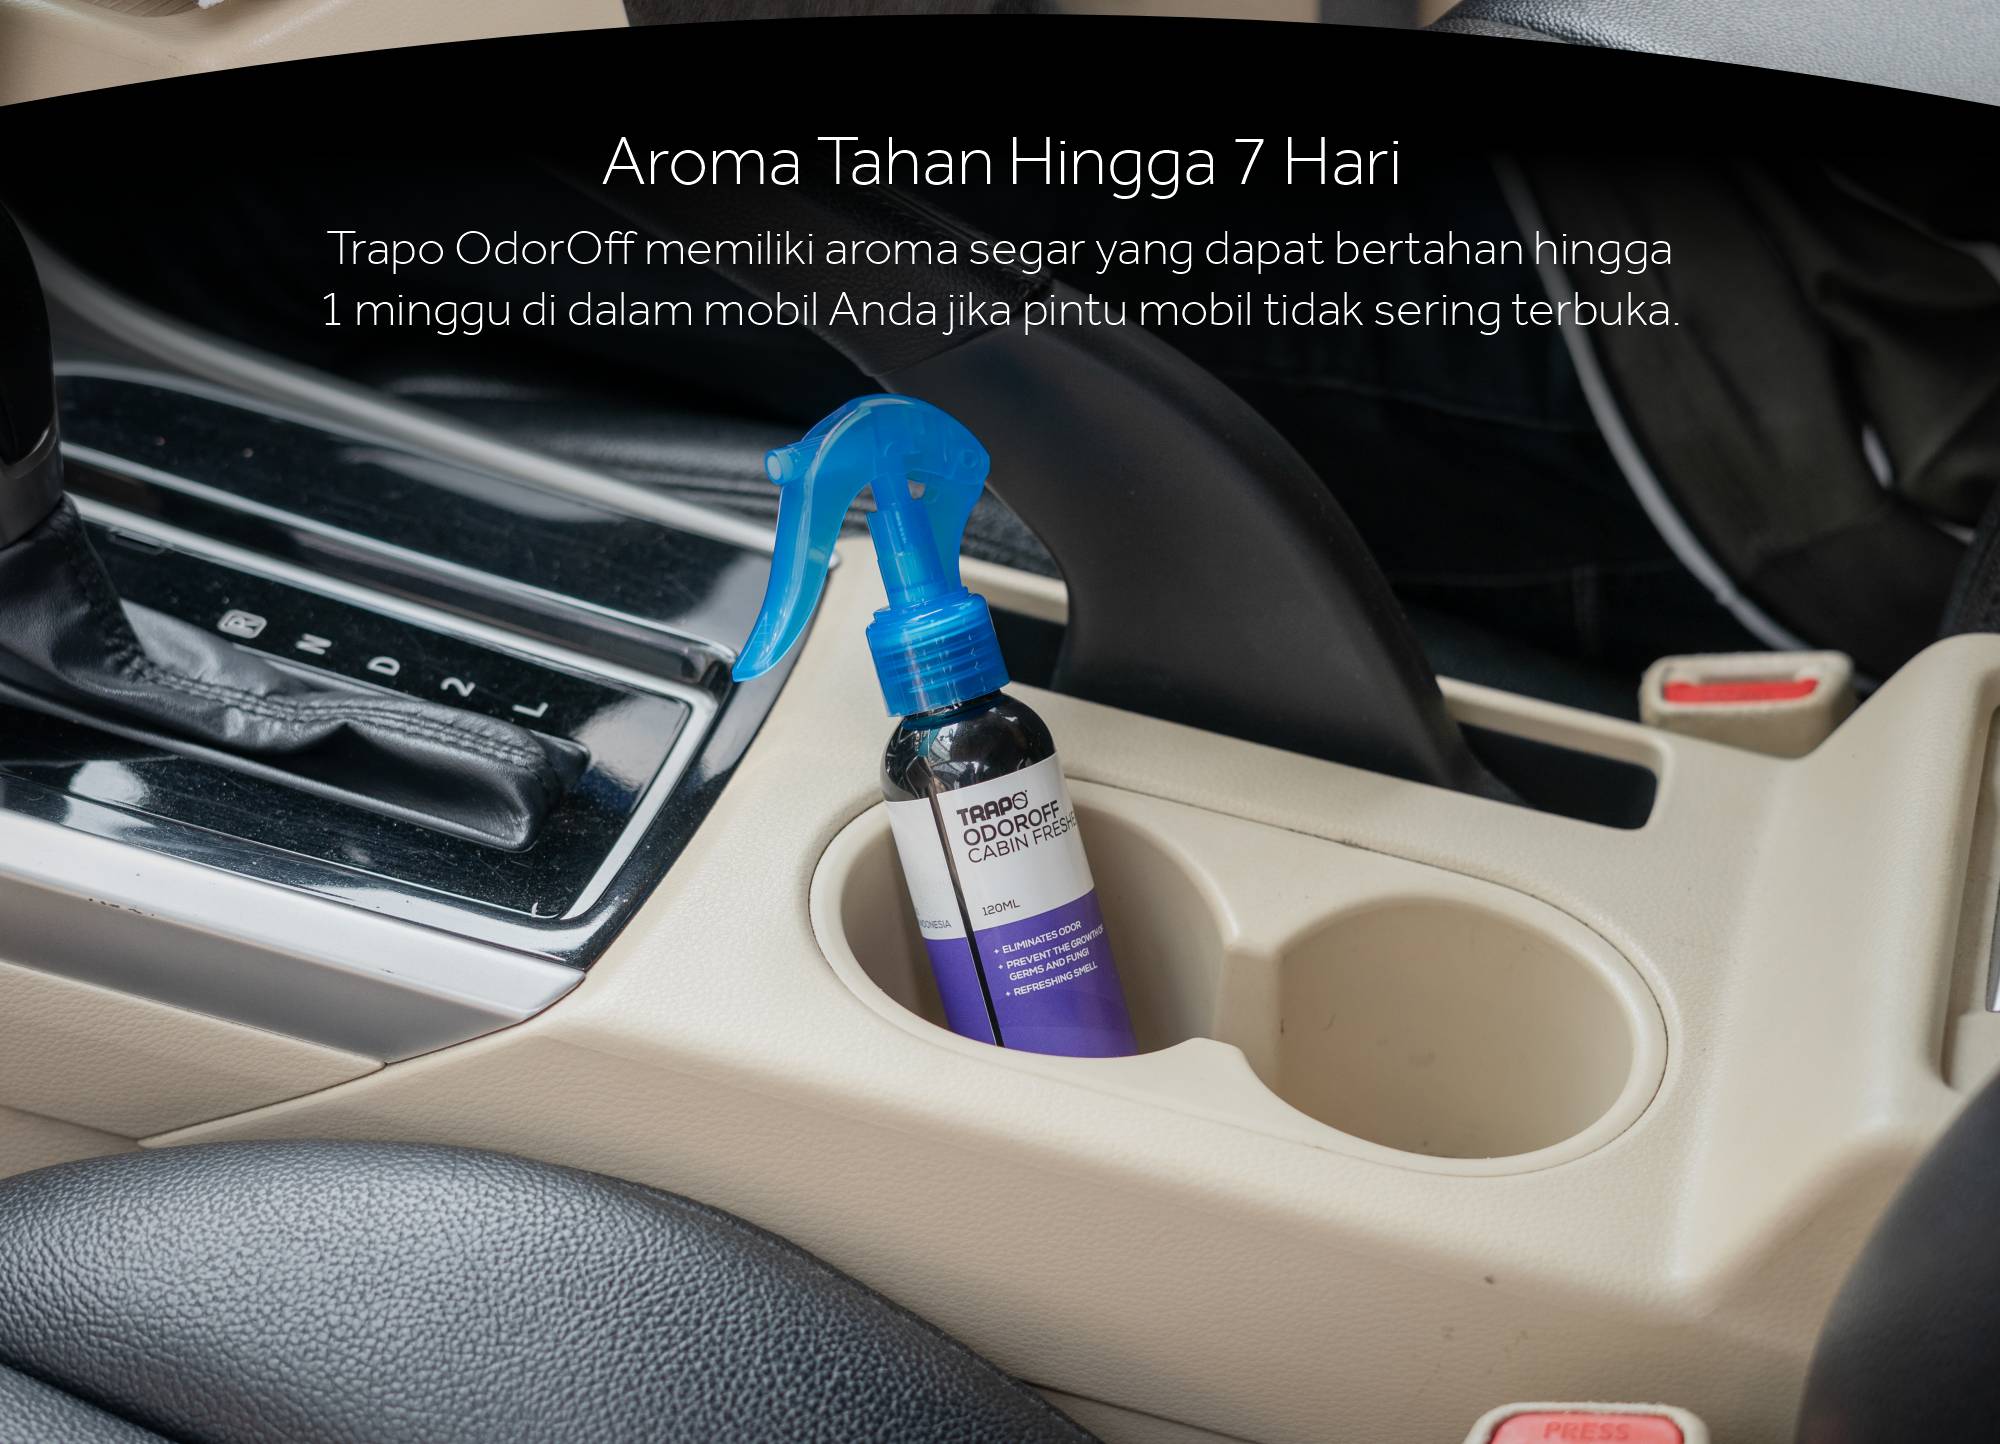 3 Simple steps, As easy as 1-2-3.1.Push and unlock  the nozzle before use.2 Spray the OXTRA Shine Guard onto a wet cloth.3 Wipe the car body area-by-area evenly